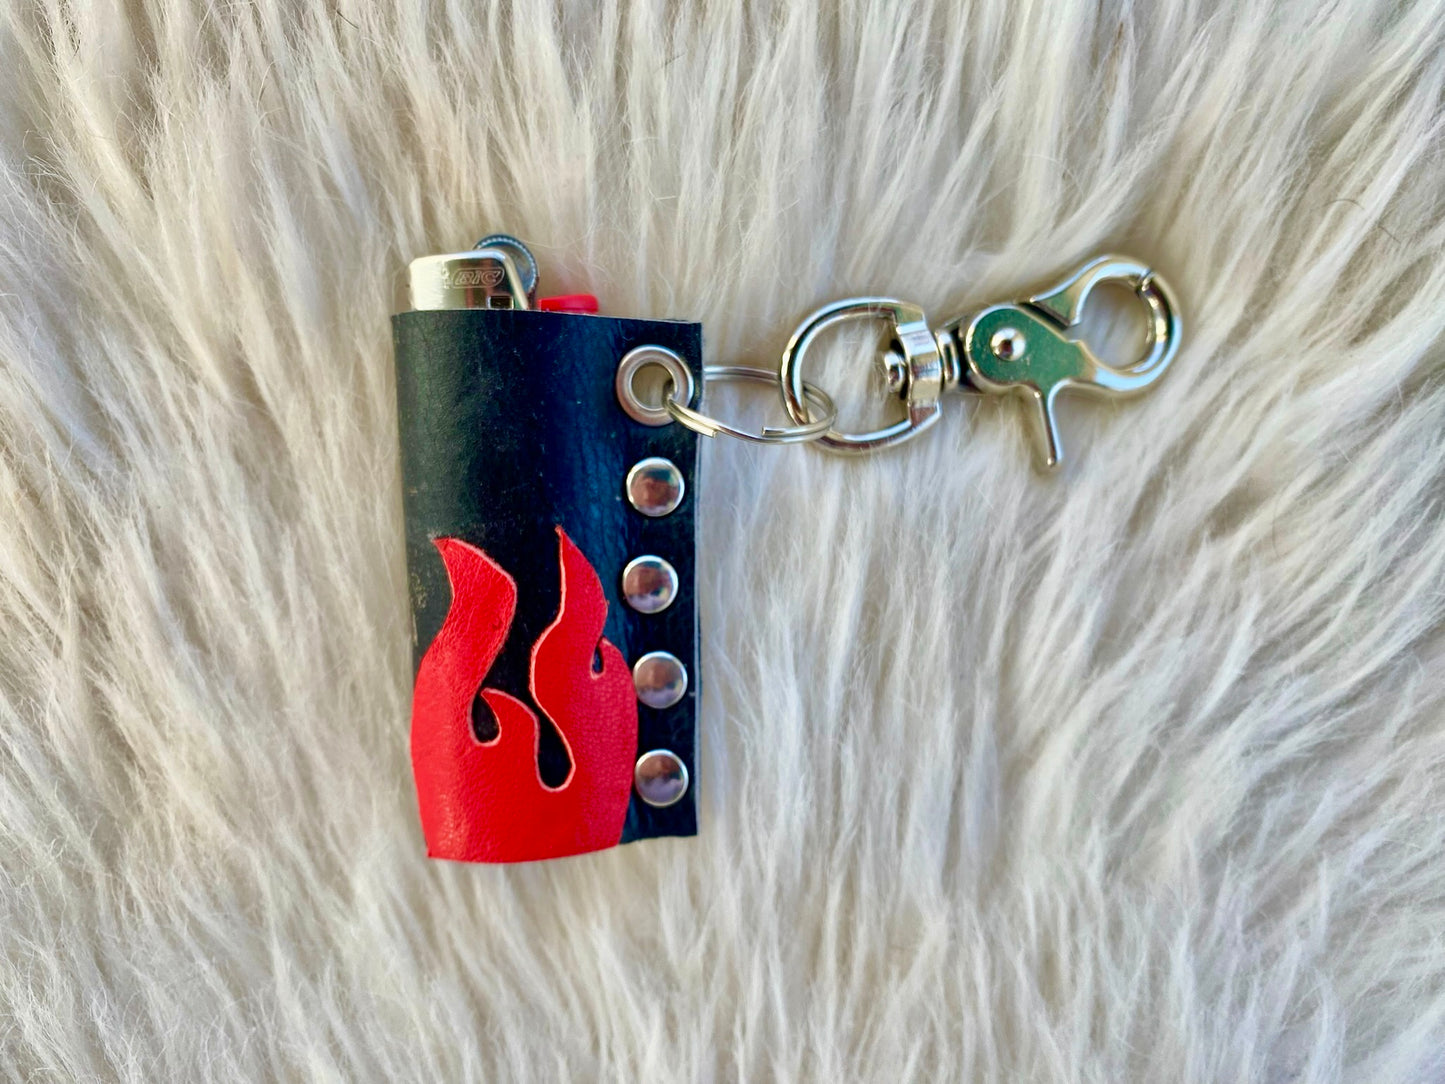 Turbo Flame Lighter Case w/ No Chain